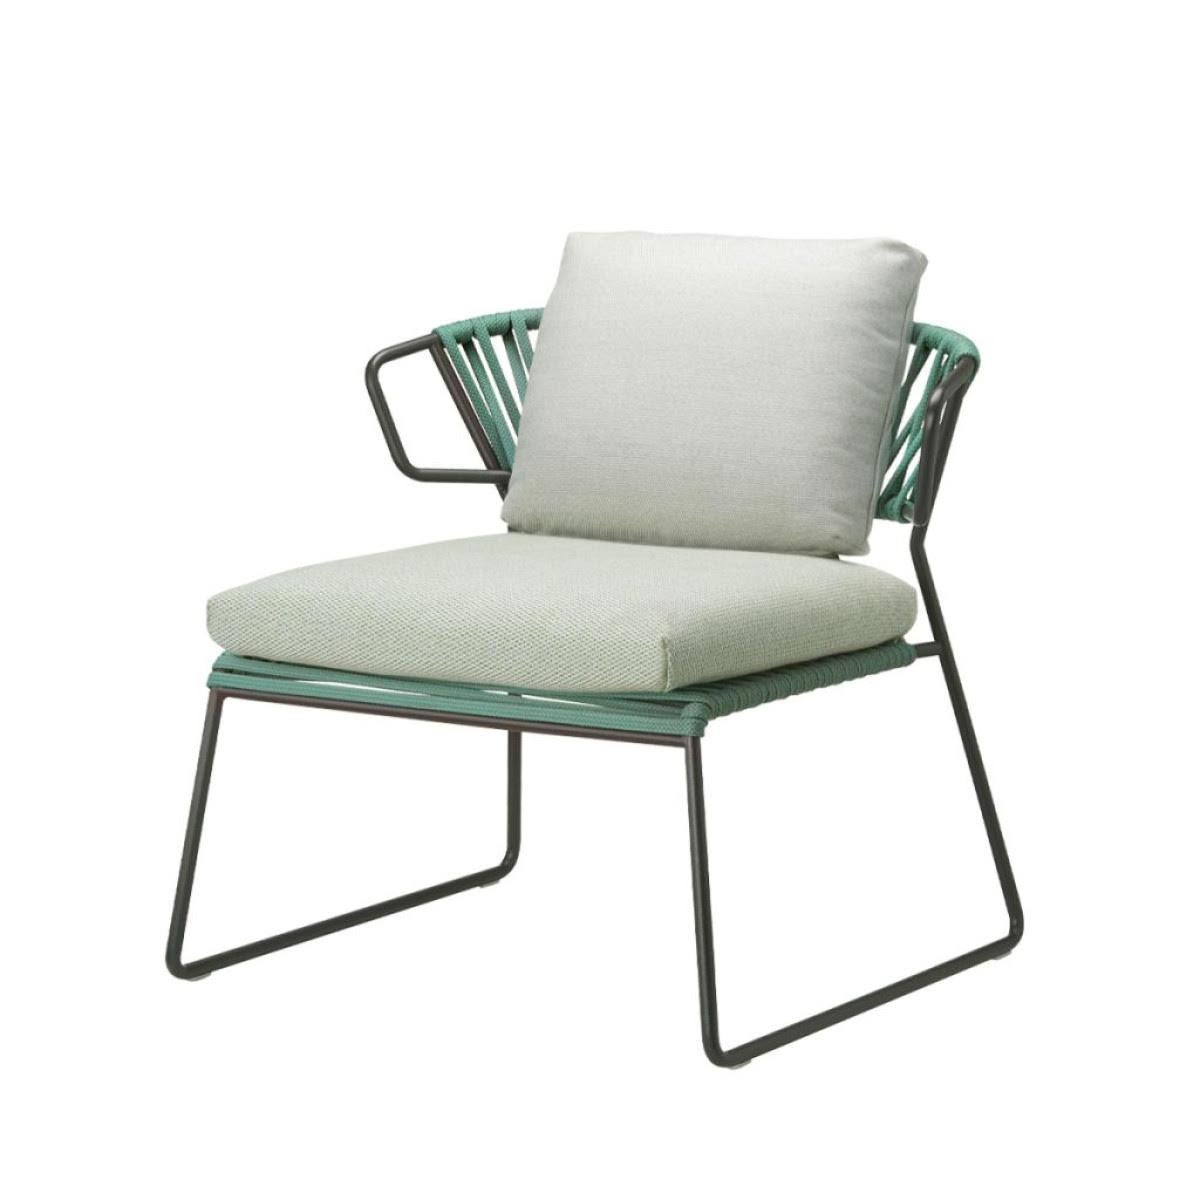 Modern Green Outdoor or Indoor Armchair in Metal and Ropes, 21 century For Sale 2